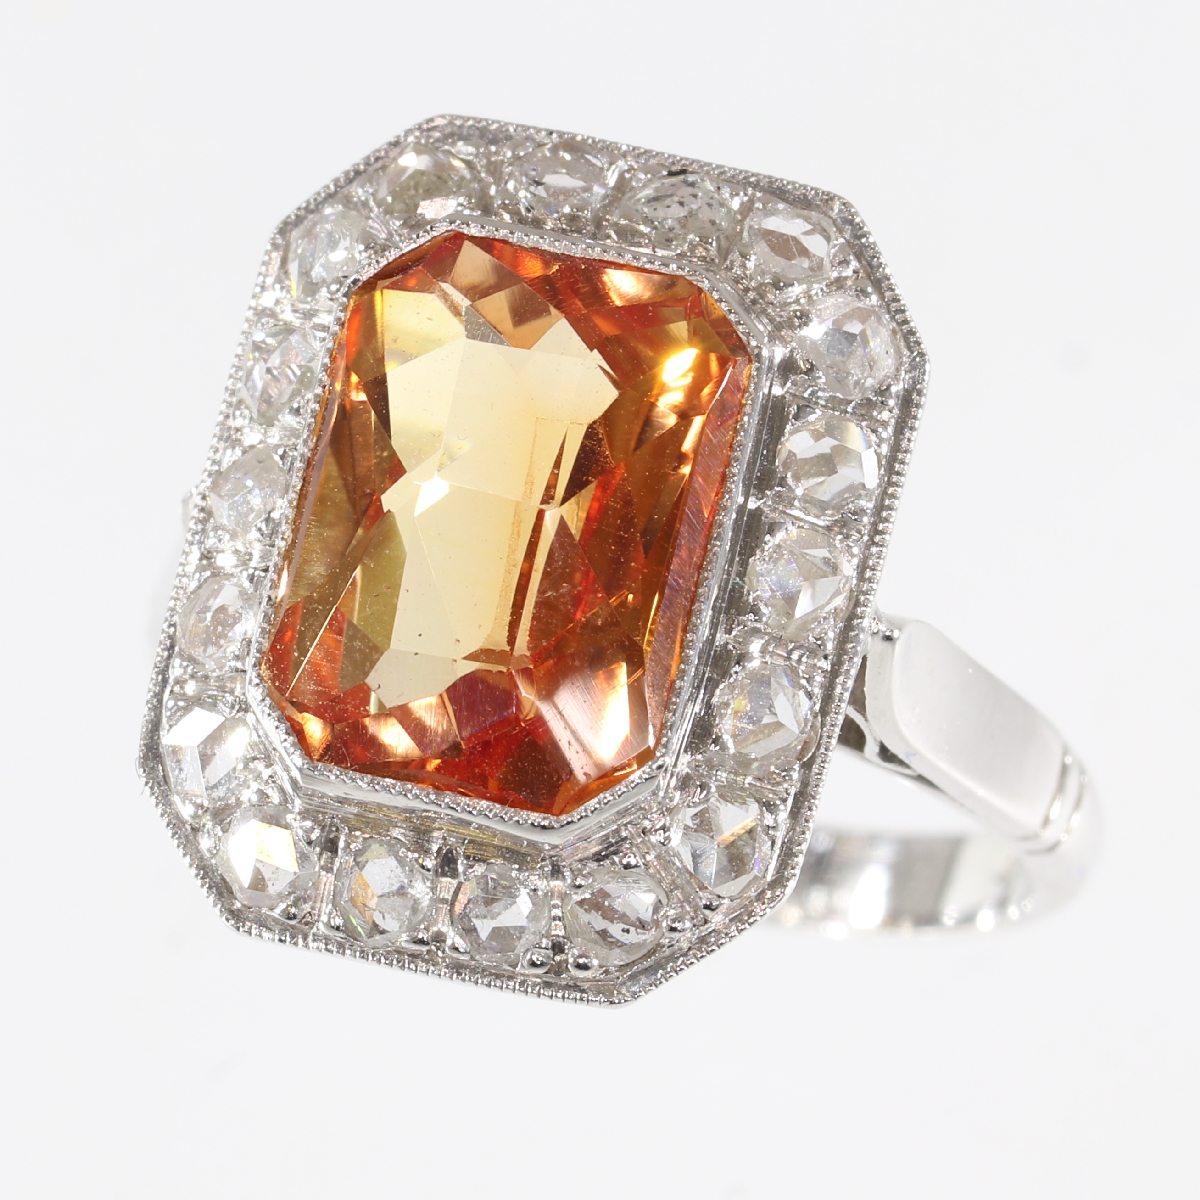 Estate rose cut diamonds ring with Verneuil padparadscha sapphire